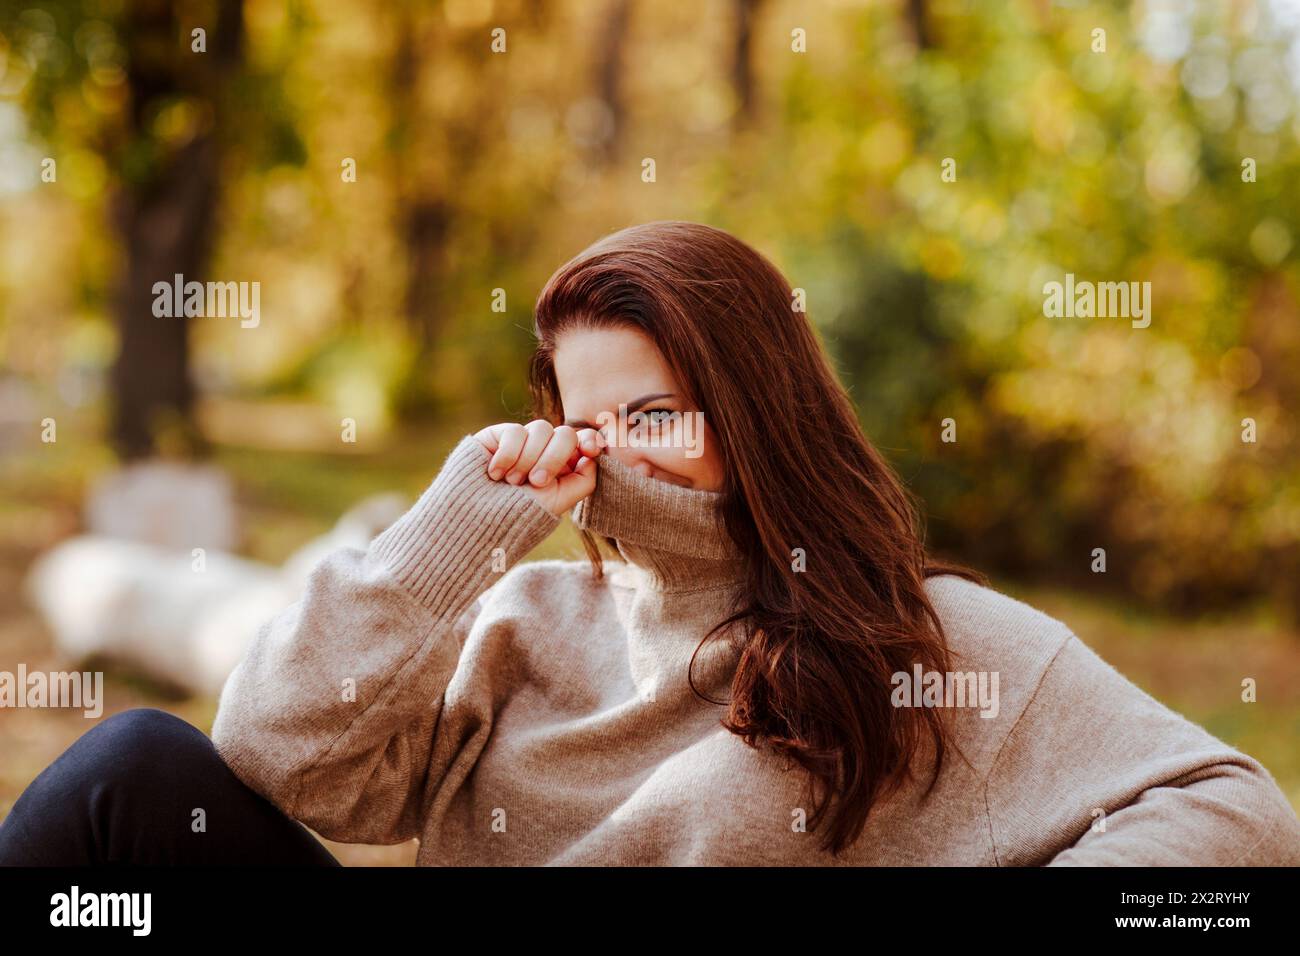 Mature woman covering face with turtleneck t-shirt in park Stock Photo